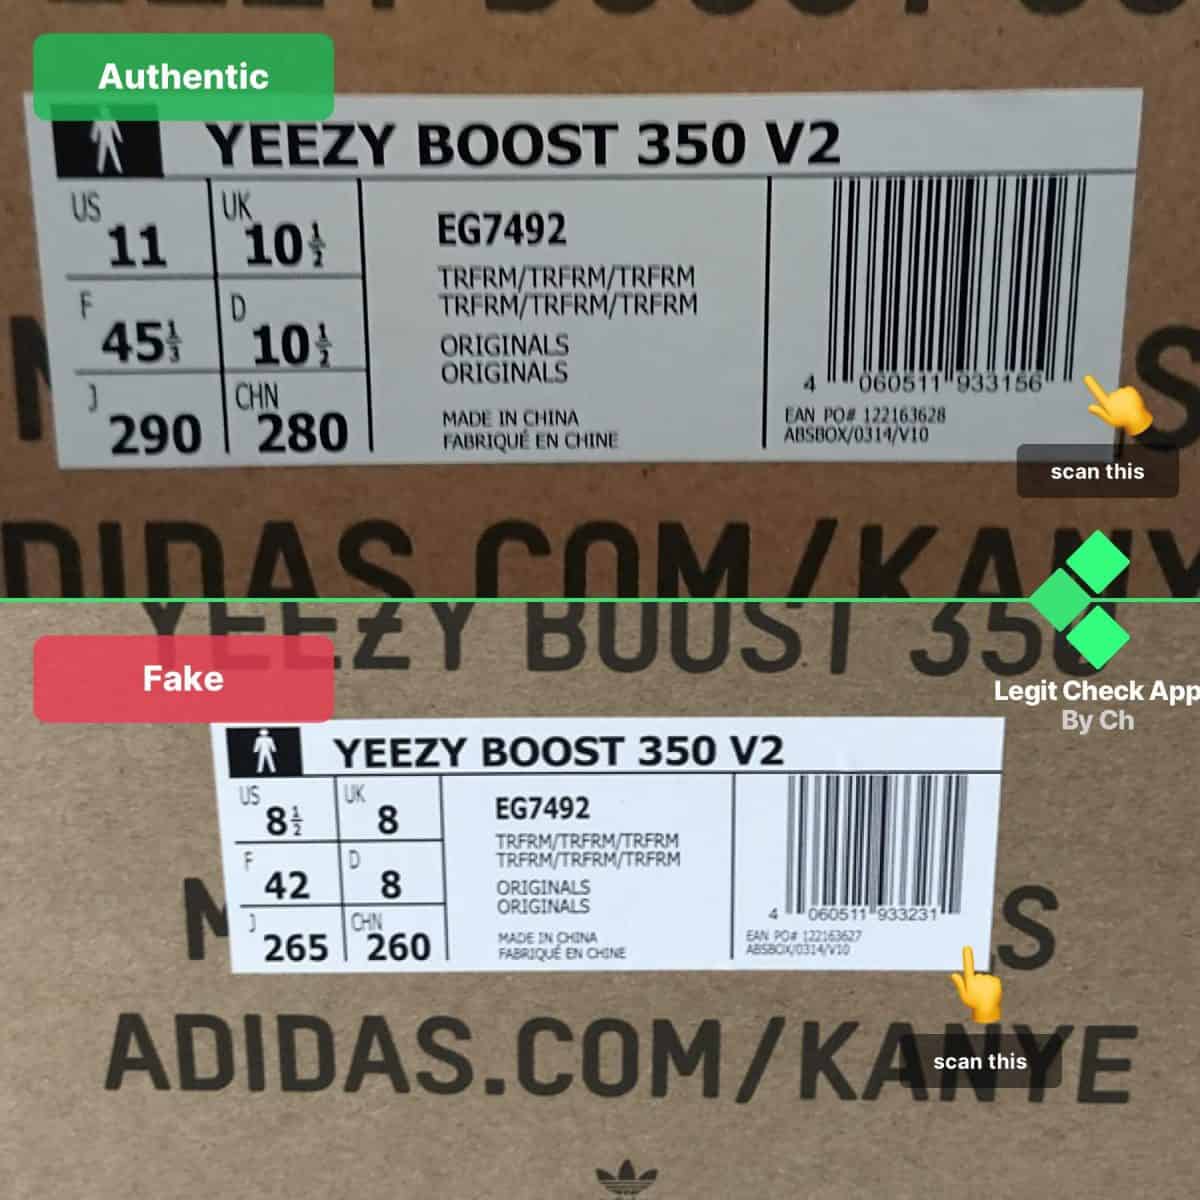 Yeezy TRFRM Box Barcode Label